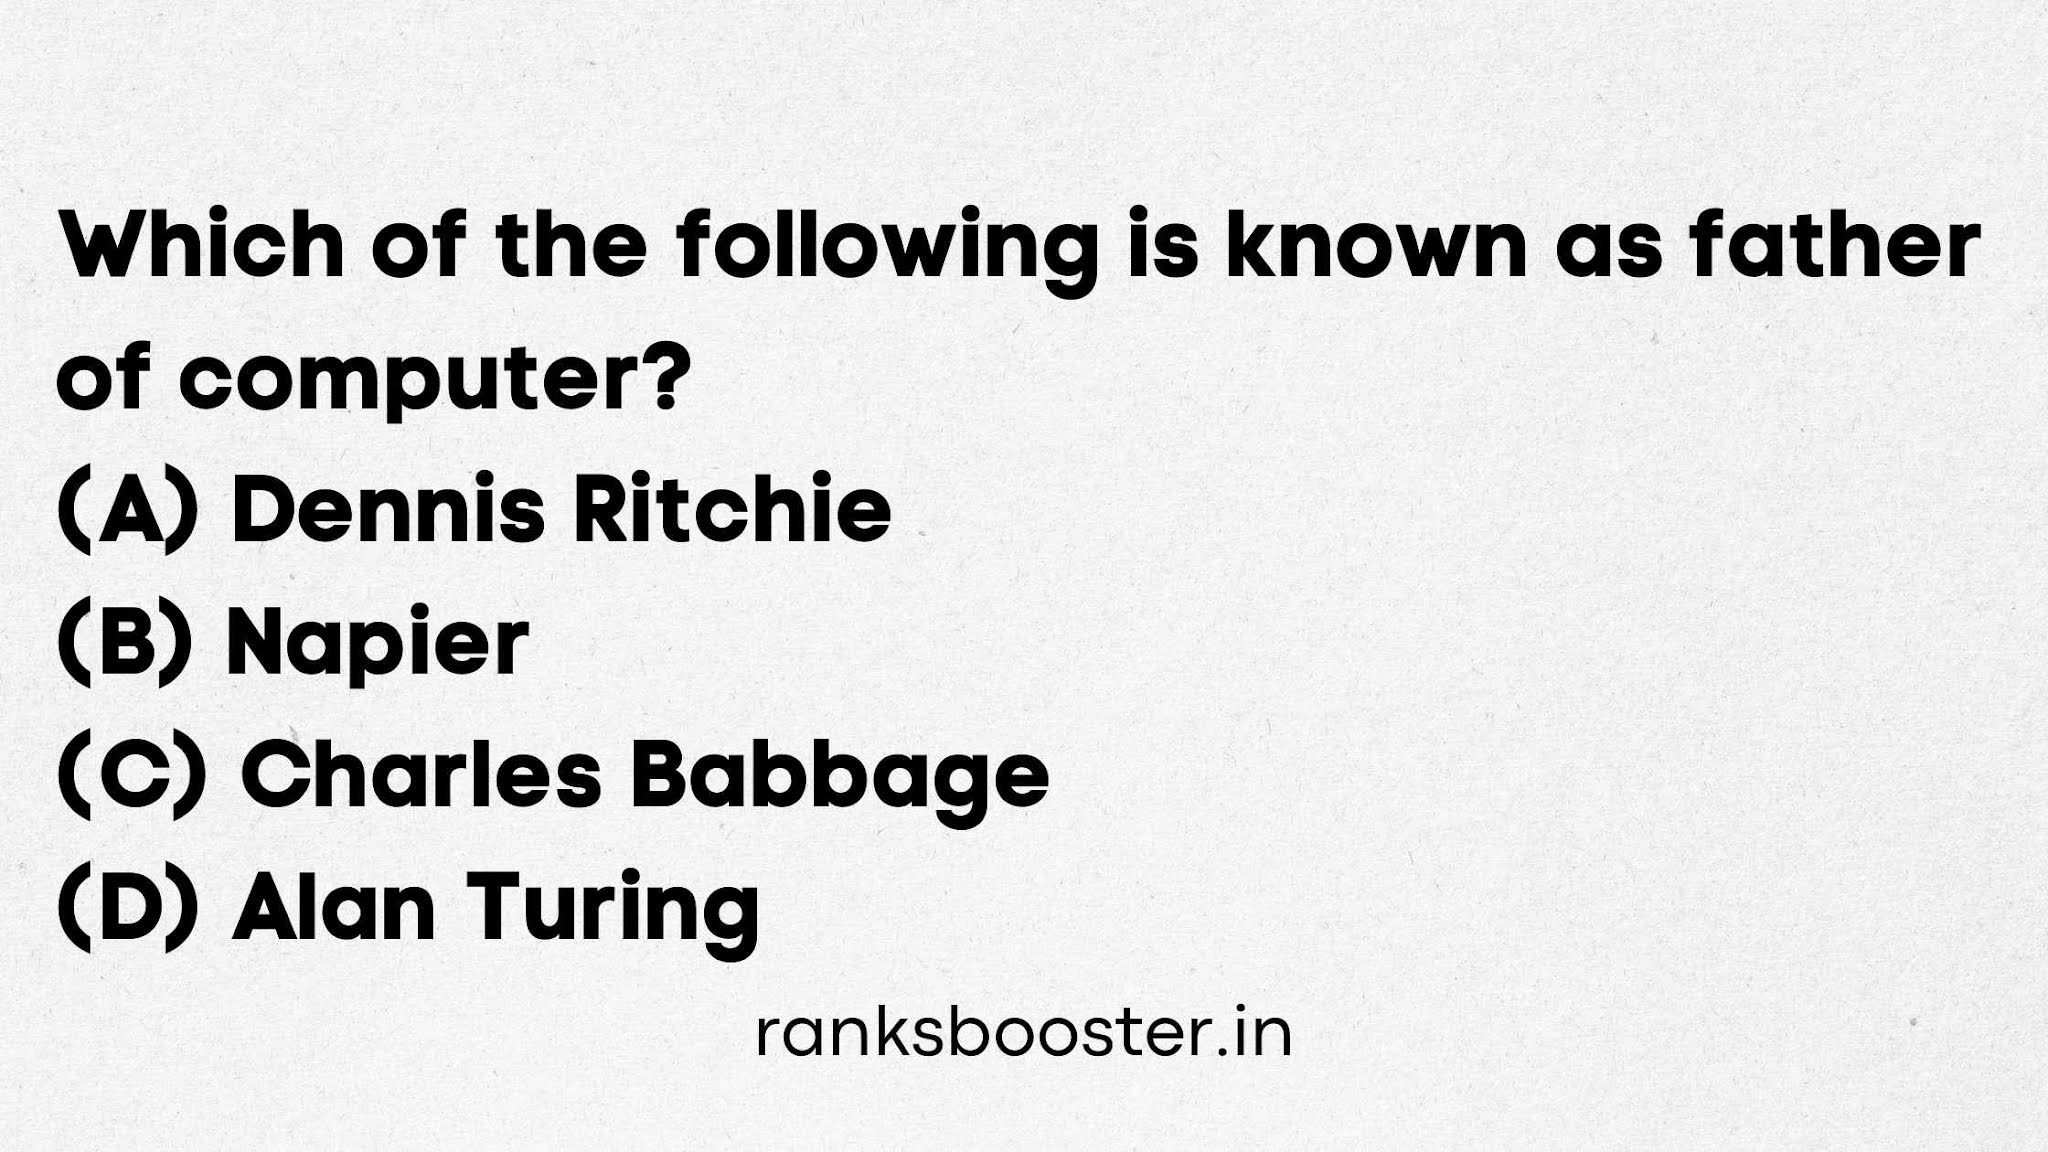 Which of the following is known as father of computer? (A) Dennis Ritchie (B) Napier (C) Charles Babbage (D) Alan Turing